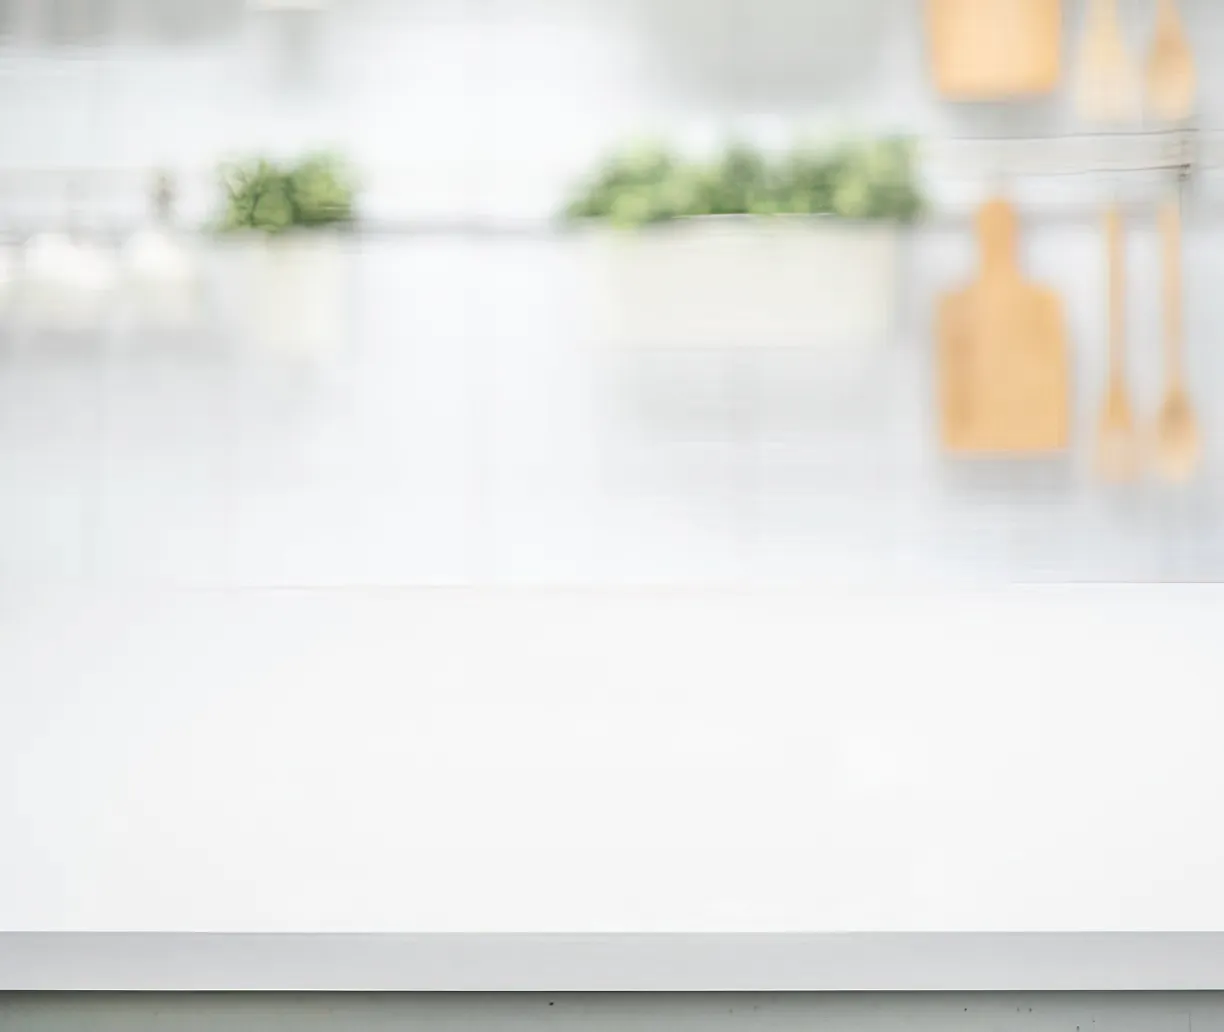 Laminate Countertops are composed of several layers of plastic laminate and paper, which are fused together under heat and pressure.